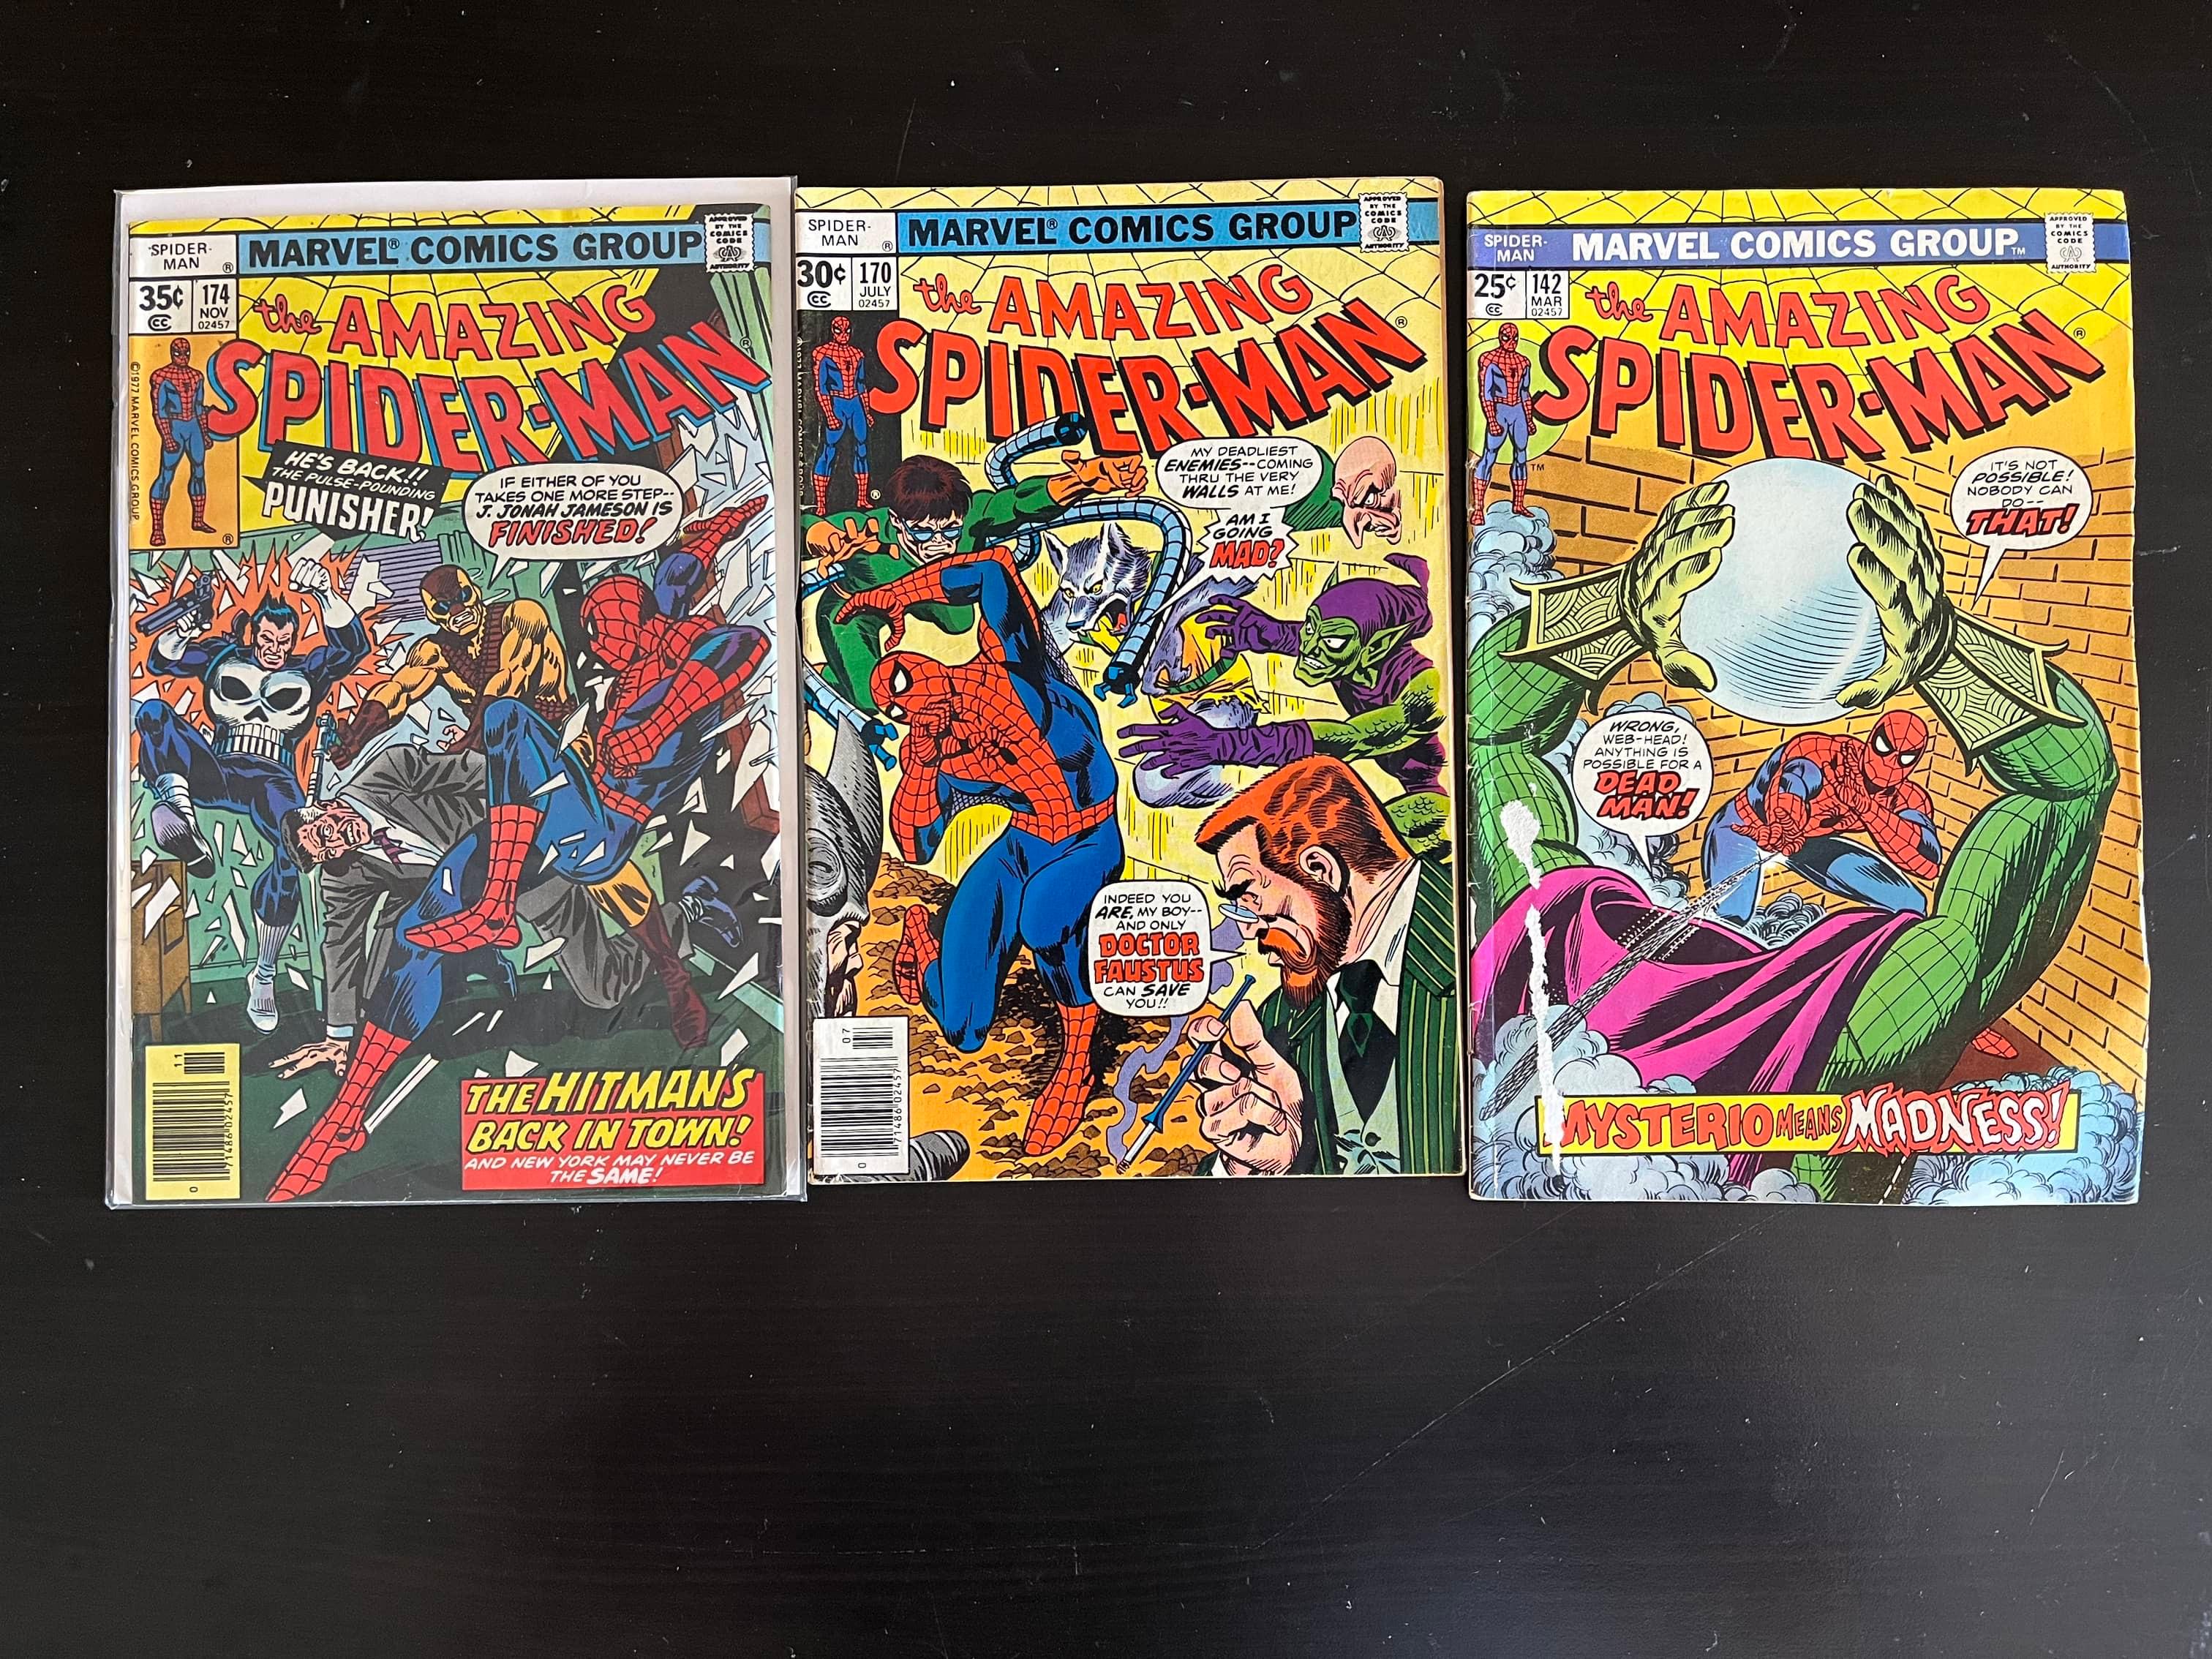 3 Issues The Amazing Spider-Man #142 #170 & #174 Marvel Comics